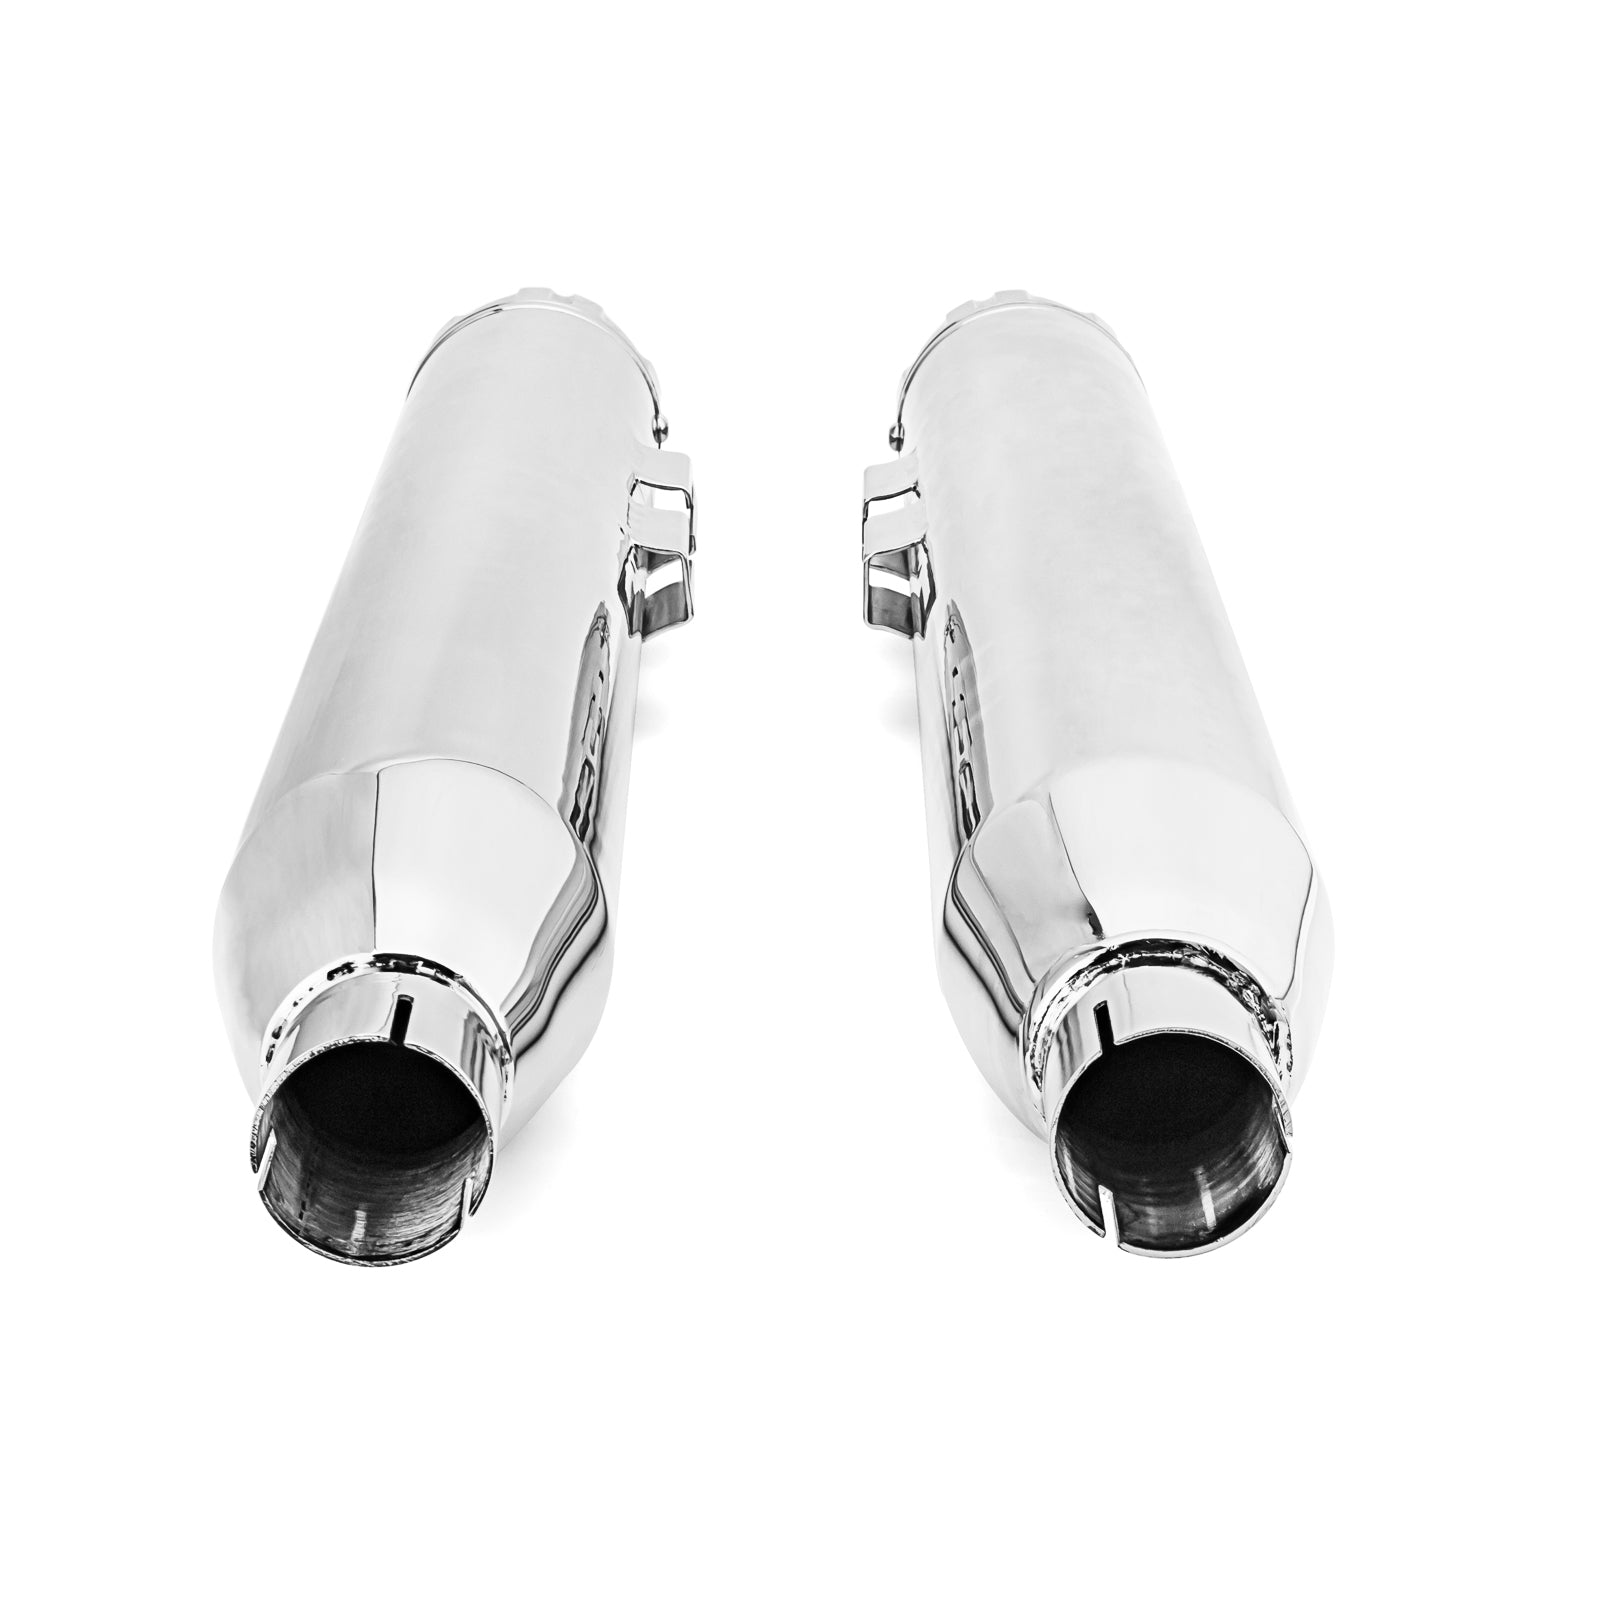 Slip-on exhausts, Page 5